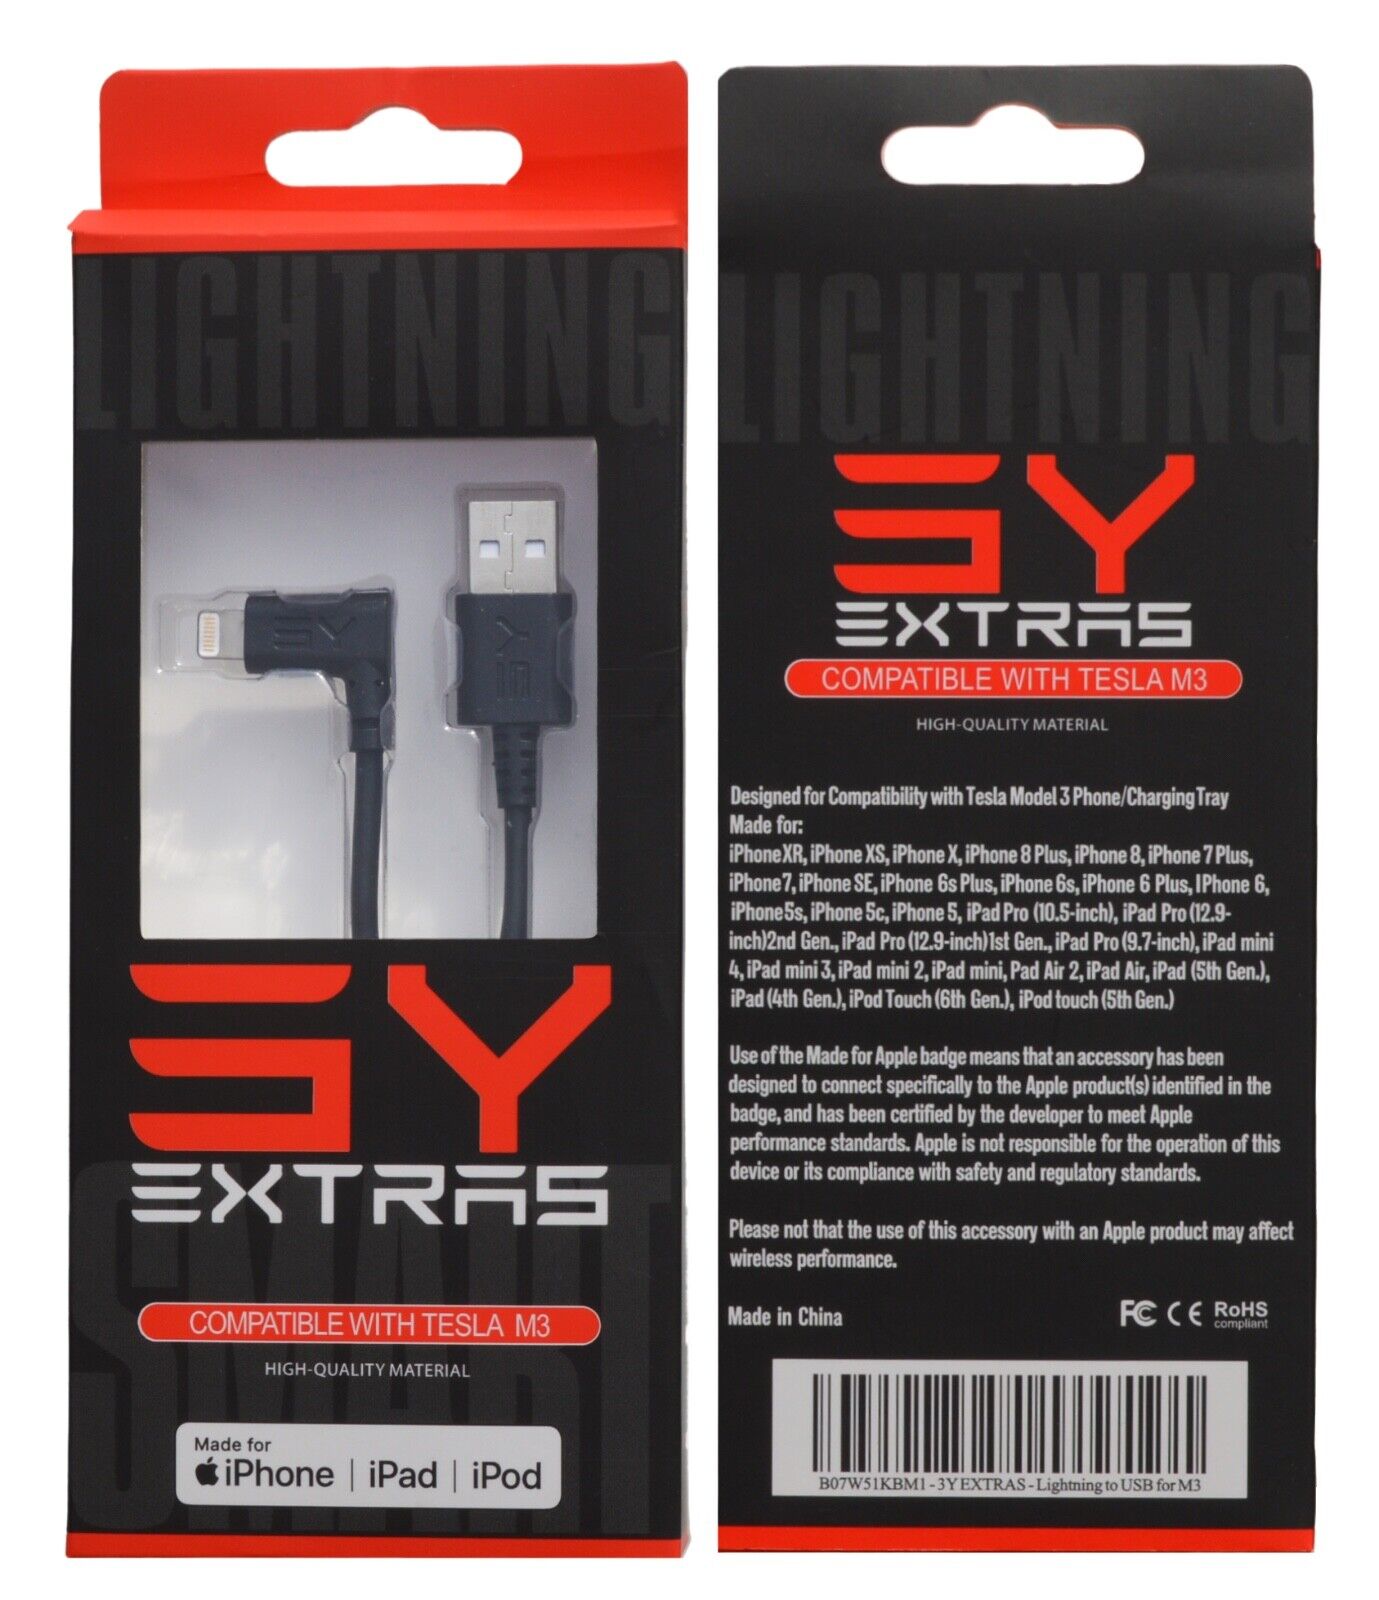 3Y Extras - Tesla Model 3 and Y iPhone Charging Cable USB - Lighting MFI  